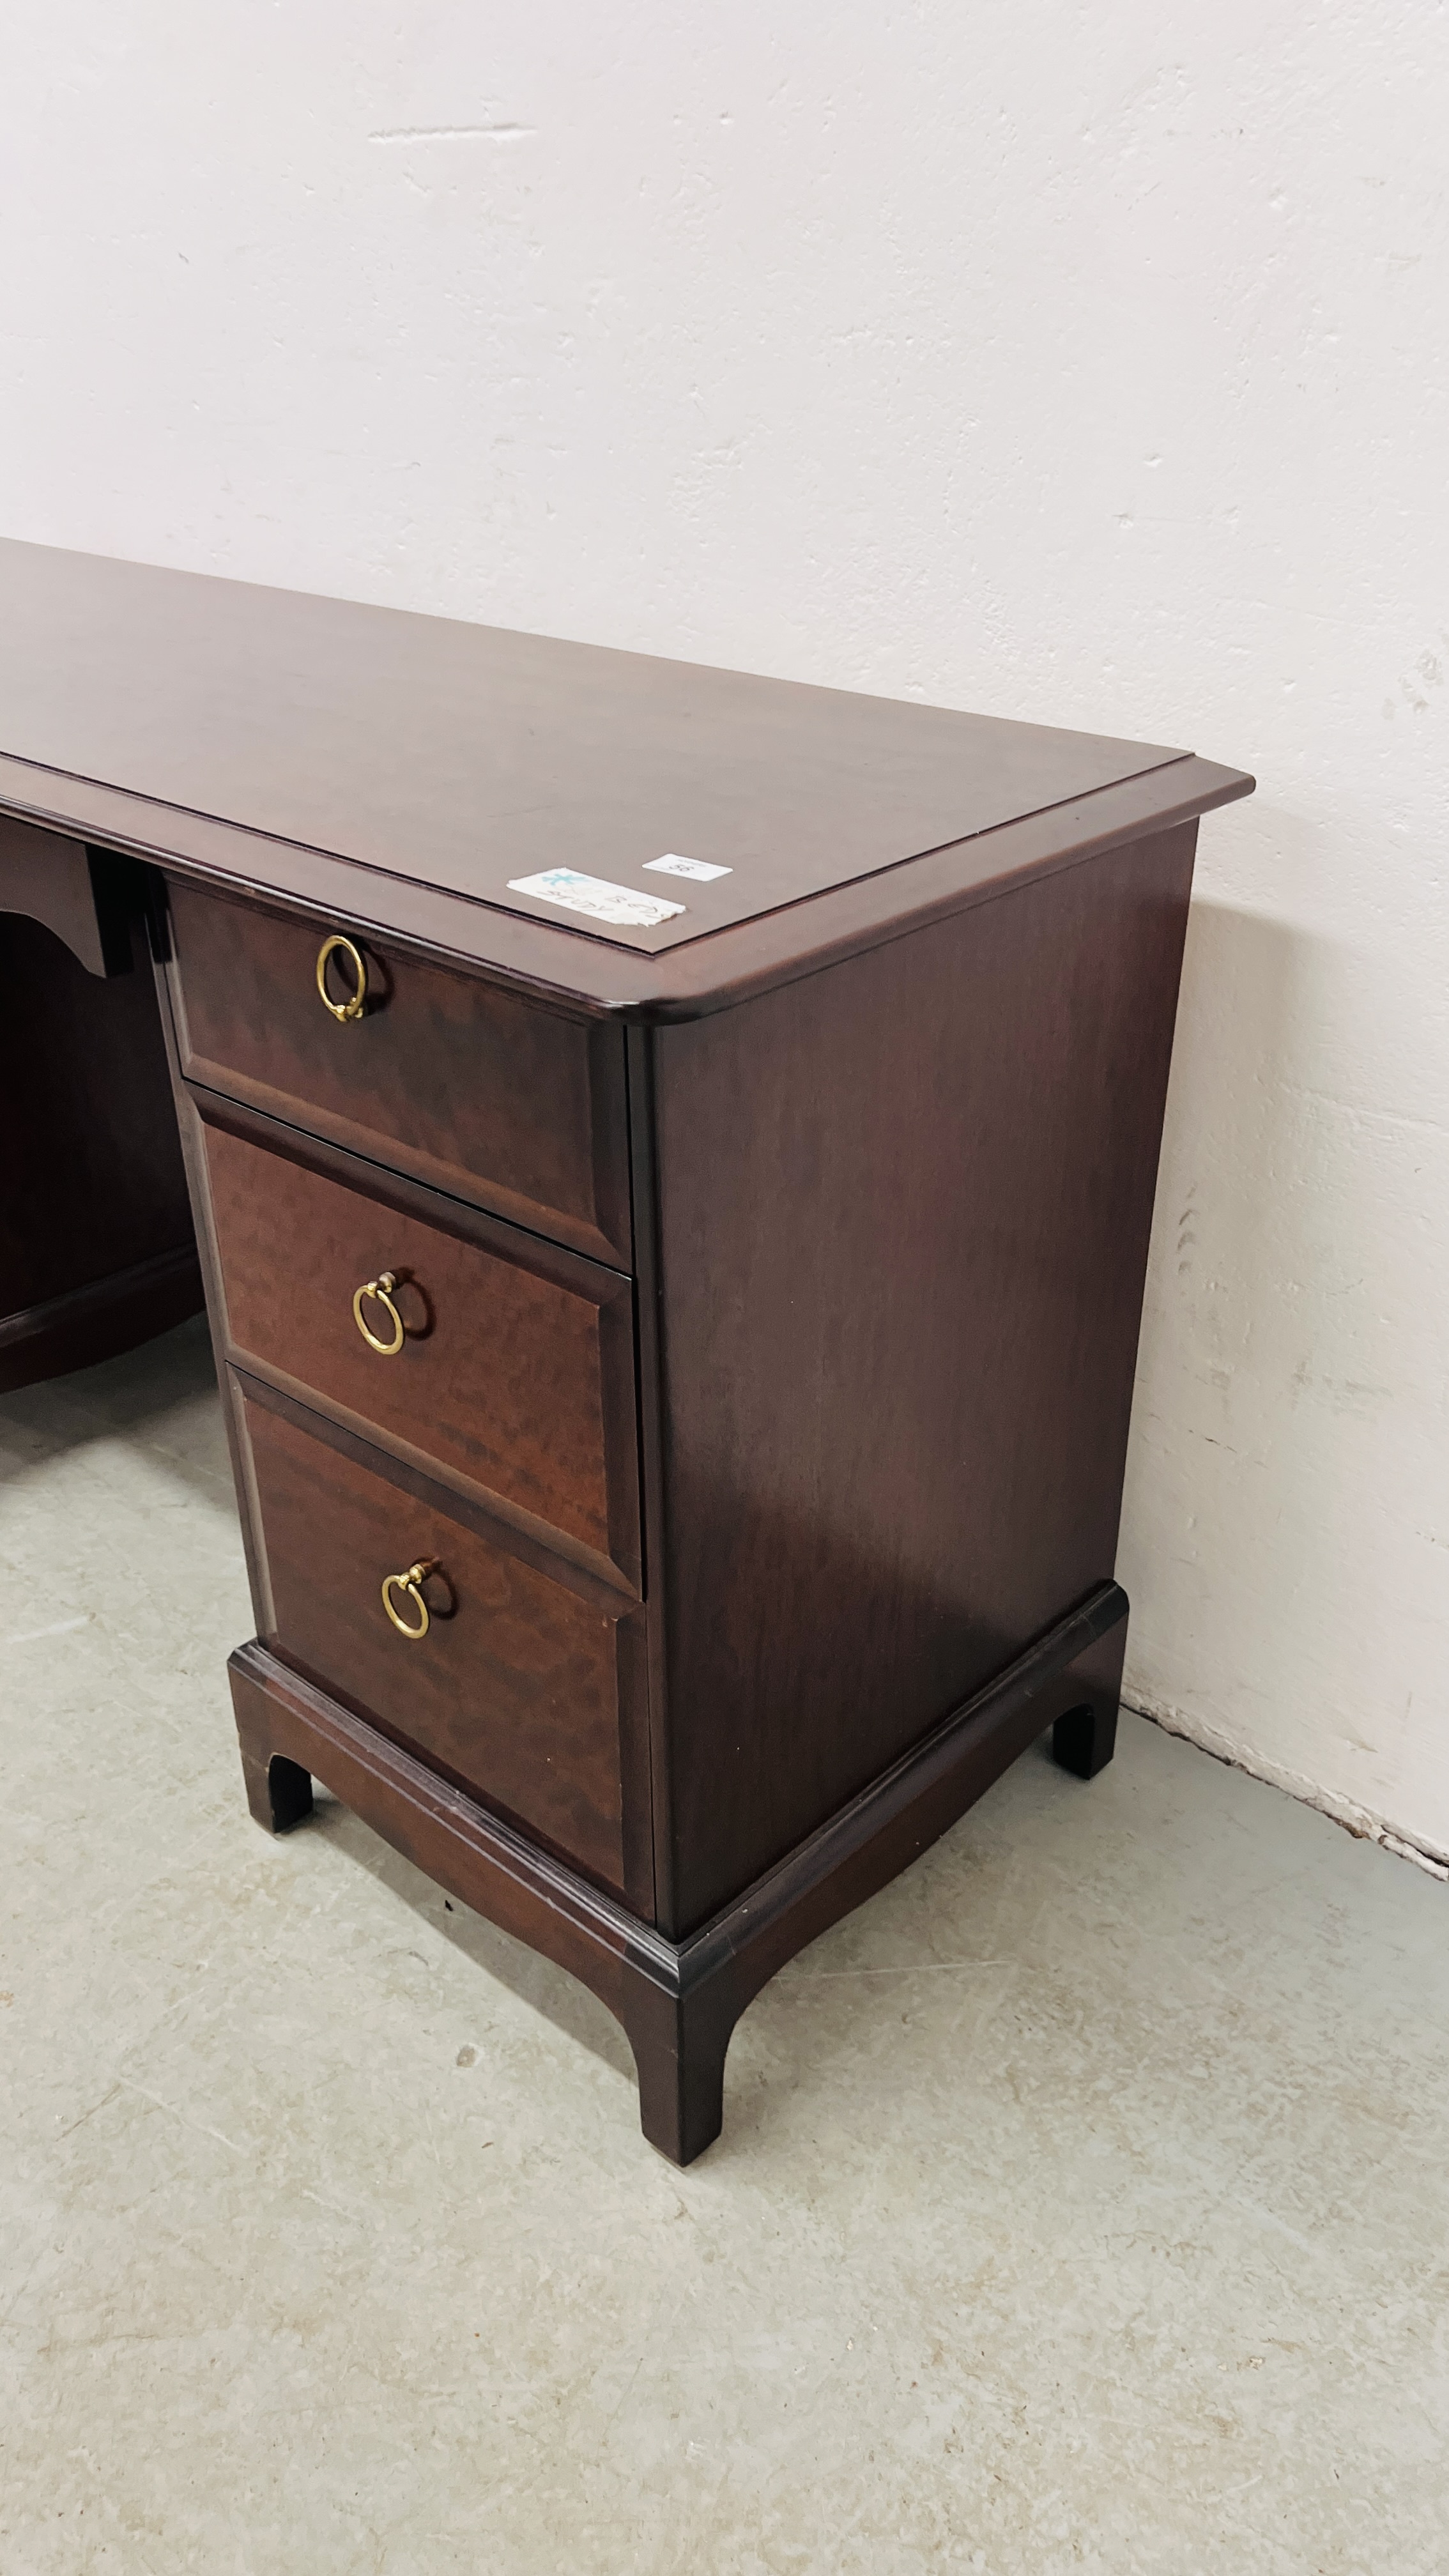 STAG SEVEN DRAWER DRESSING TABLE WIDTH 135CM. DEPTH 46CM. HEIGHT 71CM. - Image 5 of 9